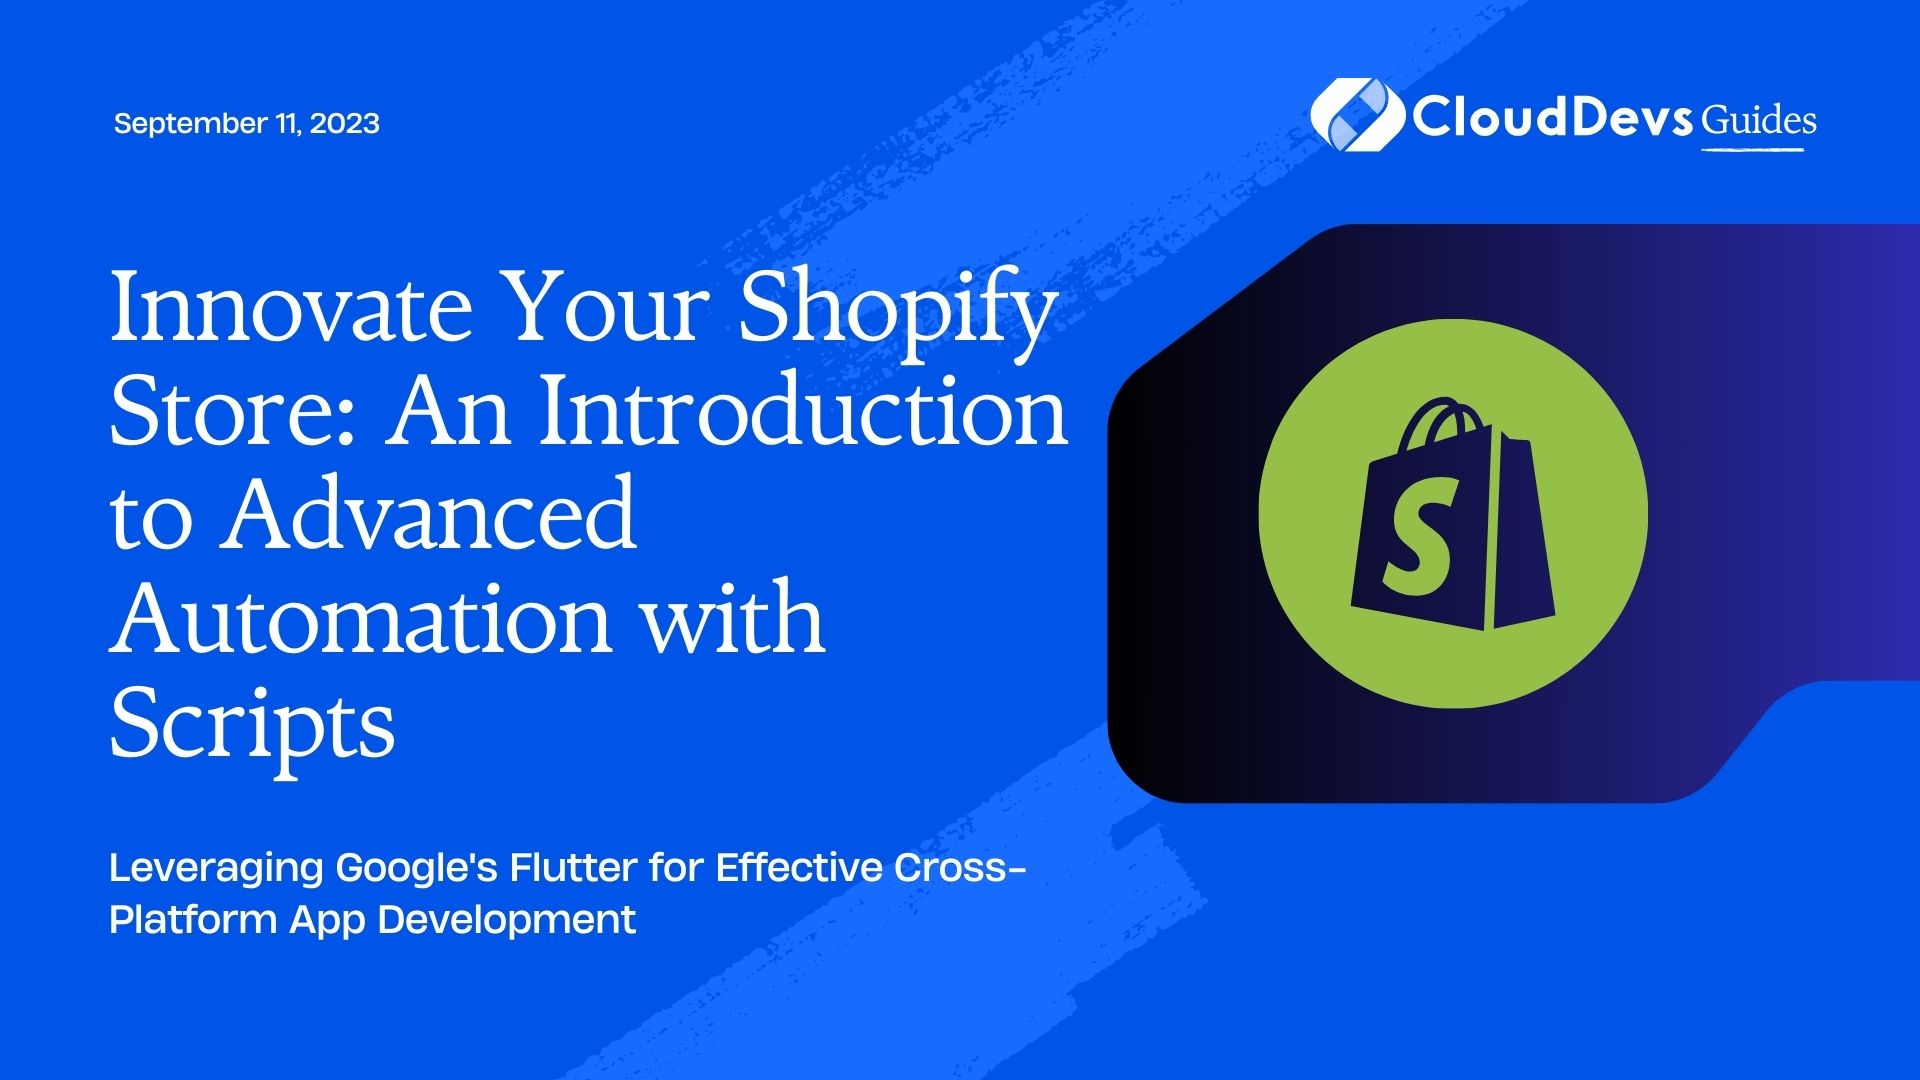 Innovate Your Shopify Store: An Introduction to Advanced Automation with Scripts